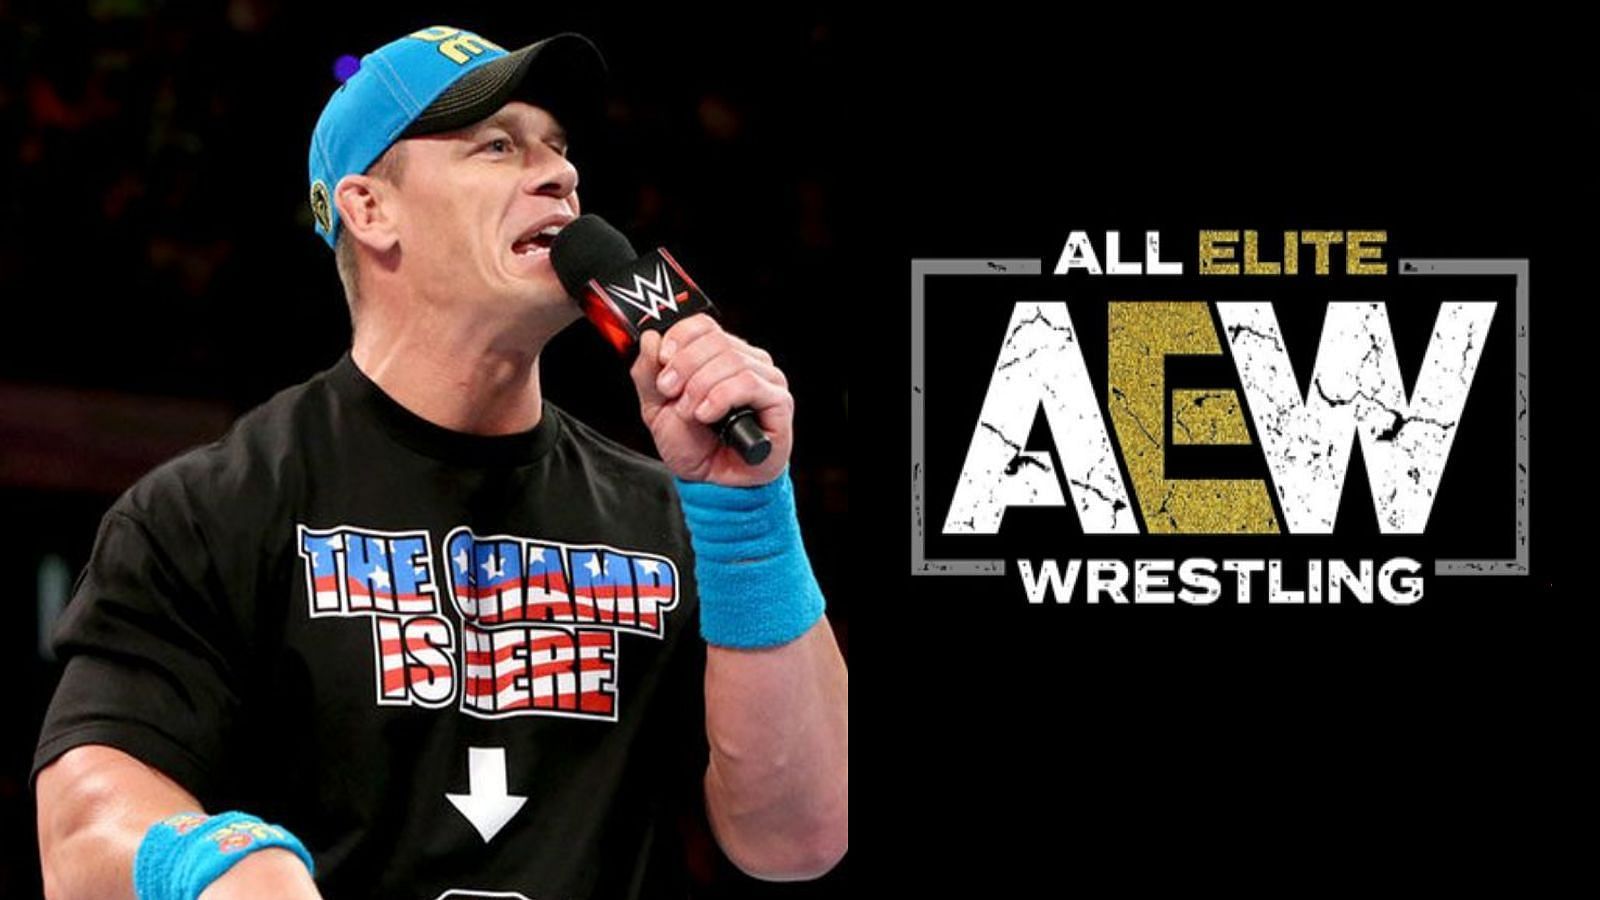 Cena is arguably the most recognizable wrestler after The Rock.